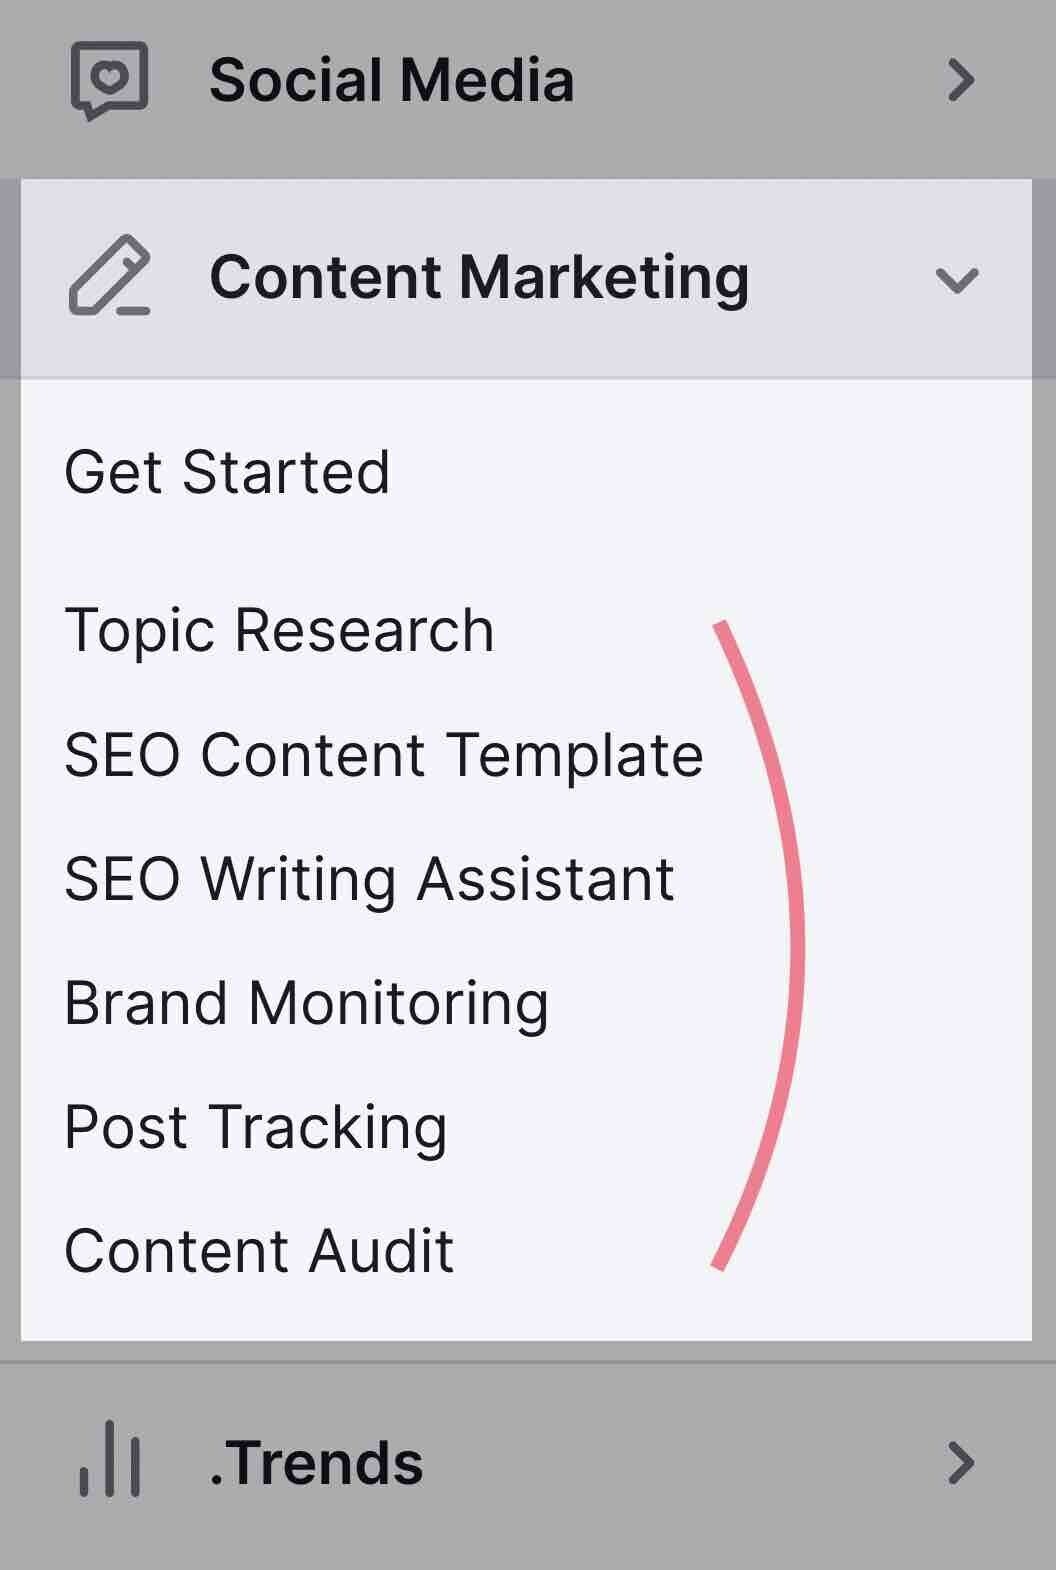 content marketing toolkit offers different tools to help your content strategy